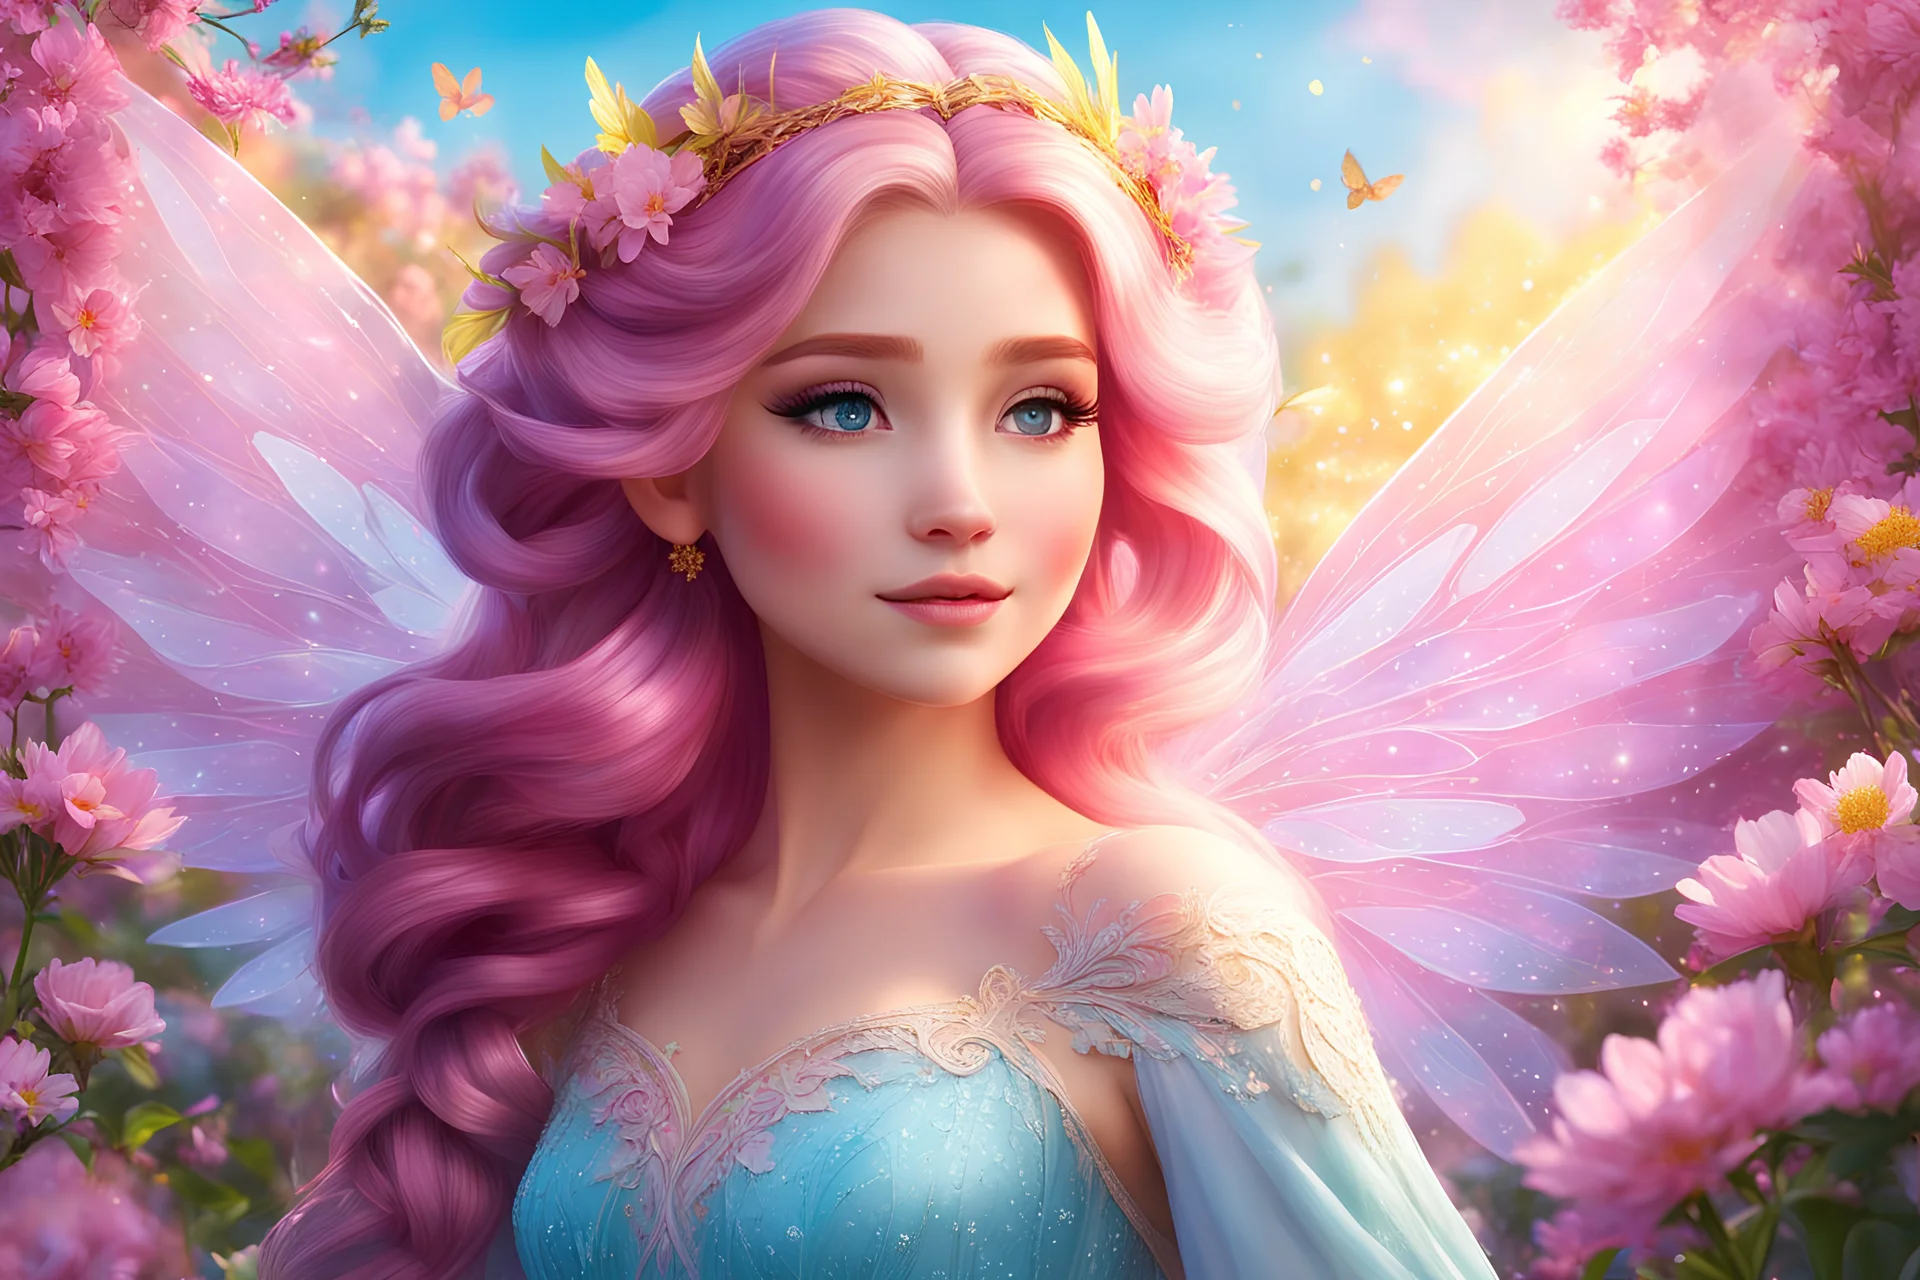 big fairy wings. As the day light sky casts its dreamy gaze upon Elsa, amidst the vibrant blossoms of spring, her pink hair right locks shimmer like a golden halo. high purity. highly detailed, digital art, beautiful detailed digital art, colorful, high quality, 4k